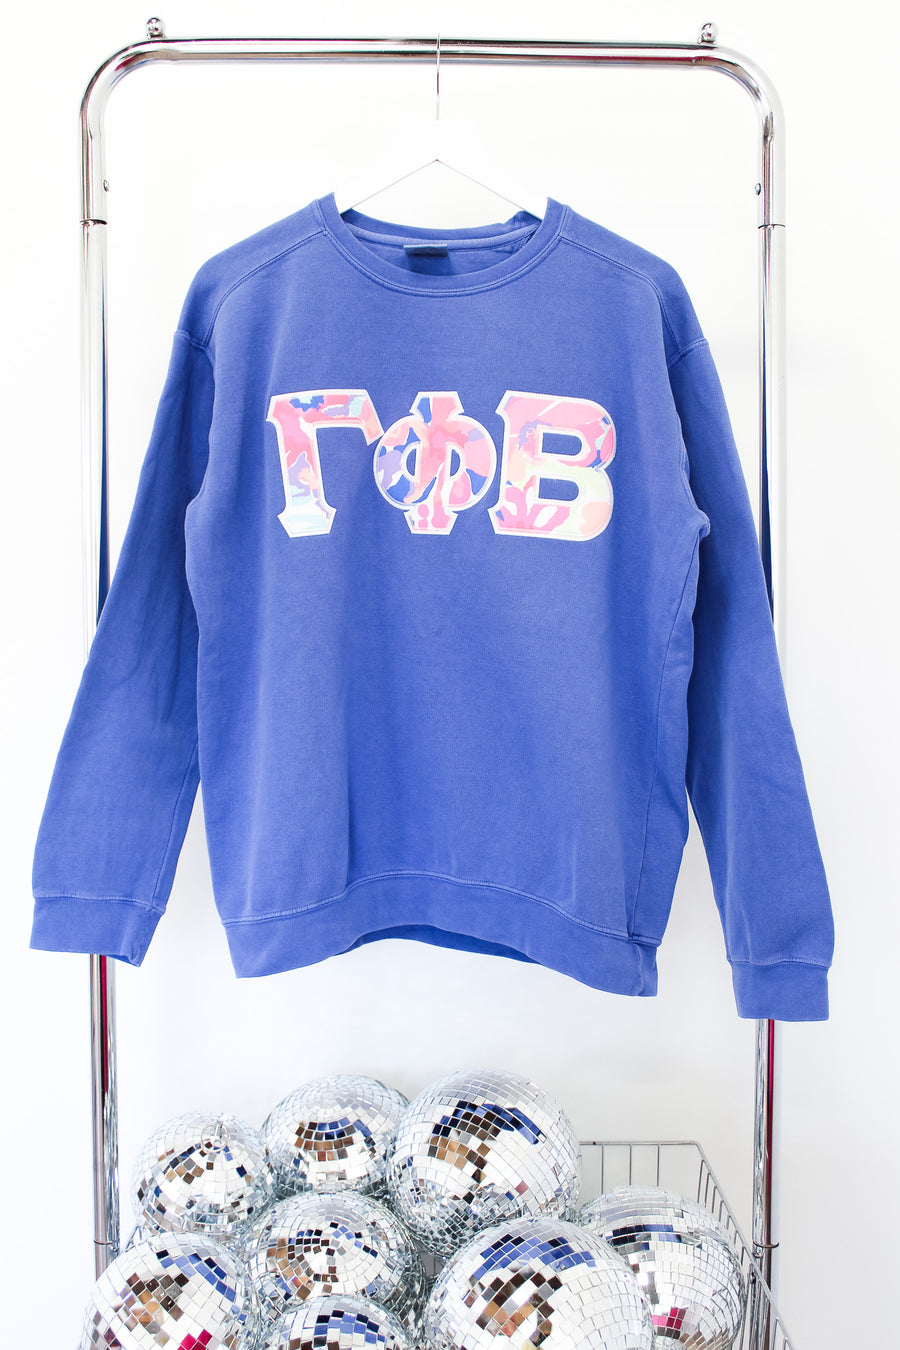 Gamma Phi Beta Embroidered Letter Crew - MD BLUE